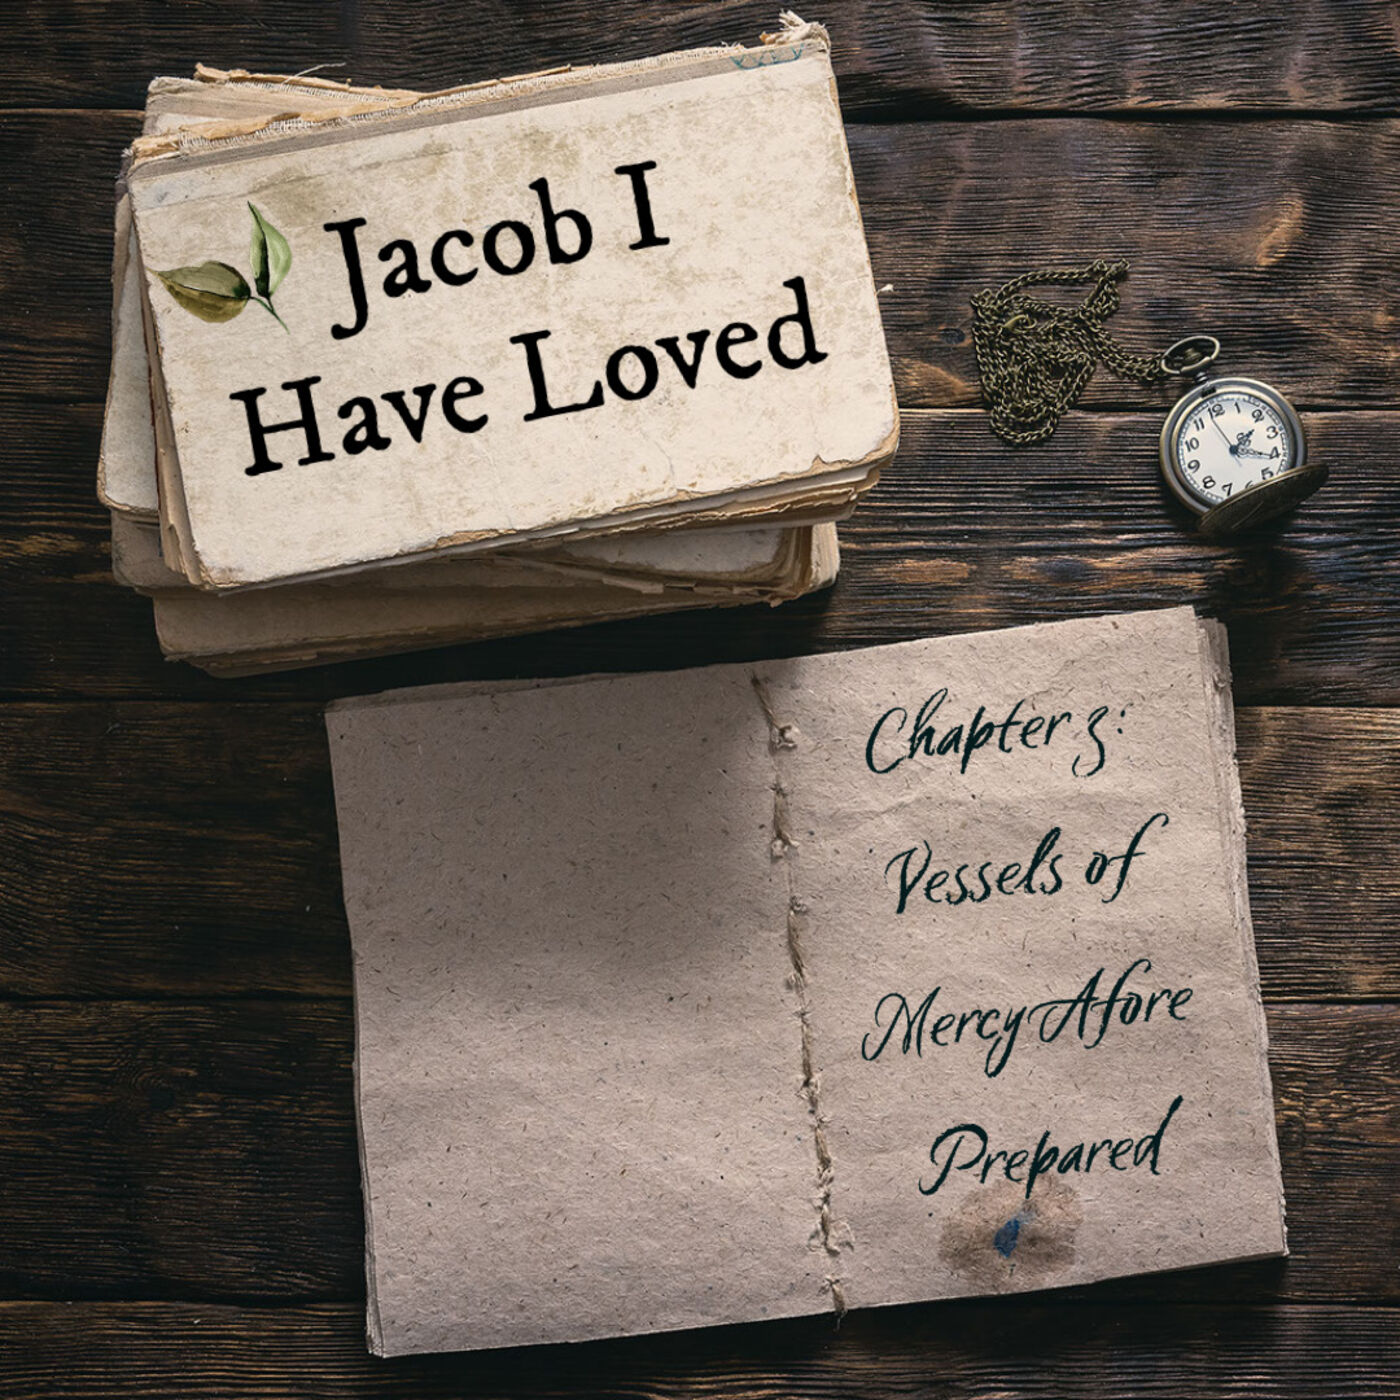 Jacob I Have Loved Audiobook Chapter 3: Vessels of Mercy Afore Prepared